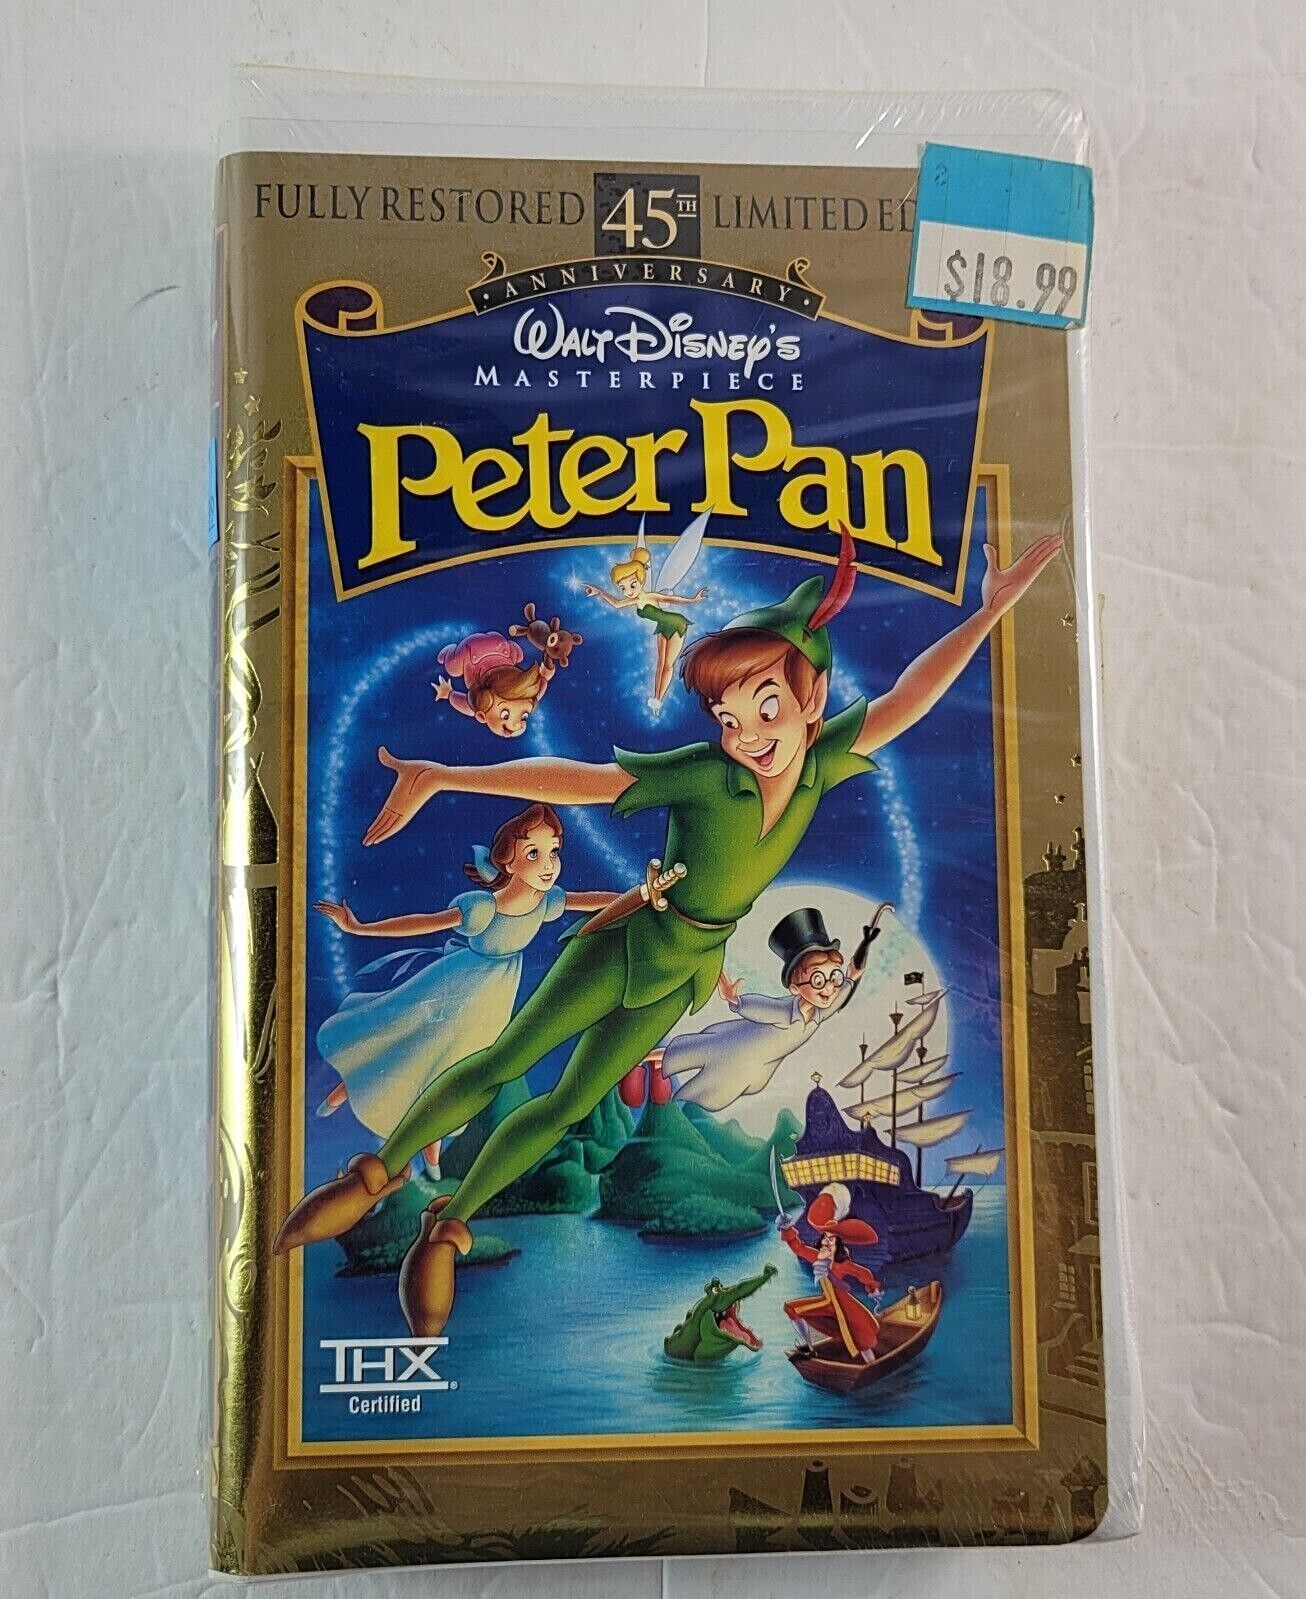 Primary image for Walt Disney VHS Peter Pan 45th Anniversary Fully Restored Limited Edition SEALED